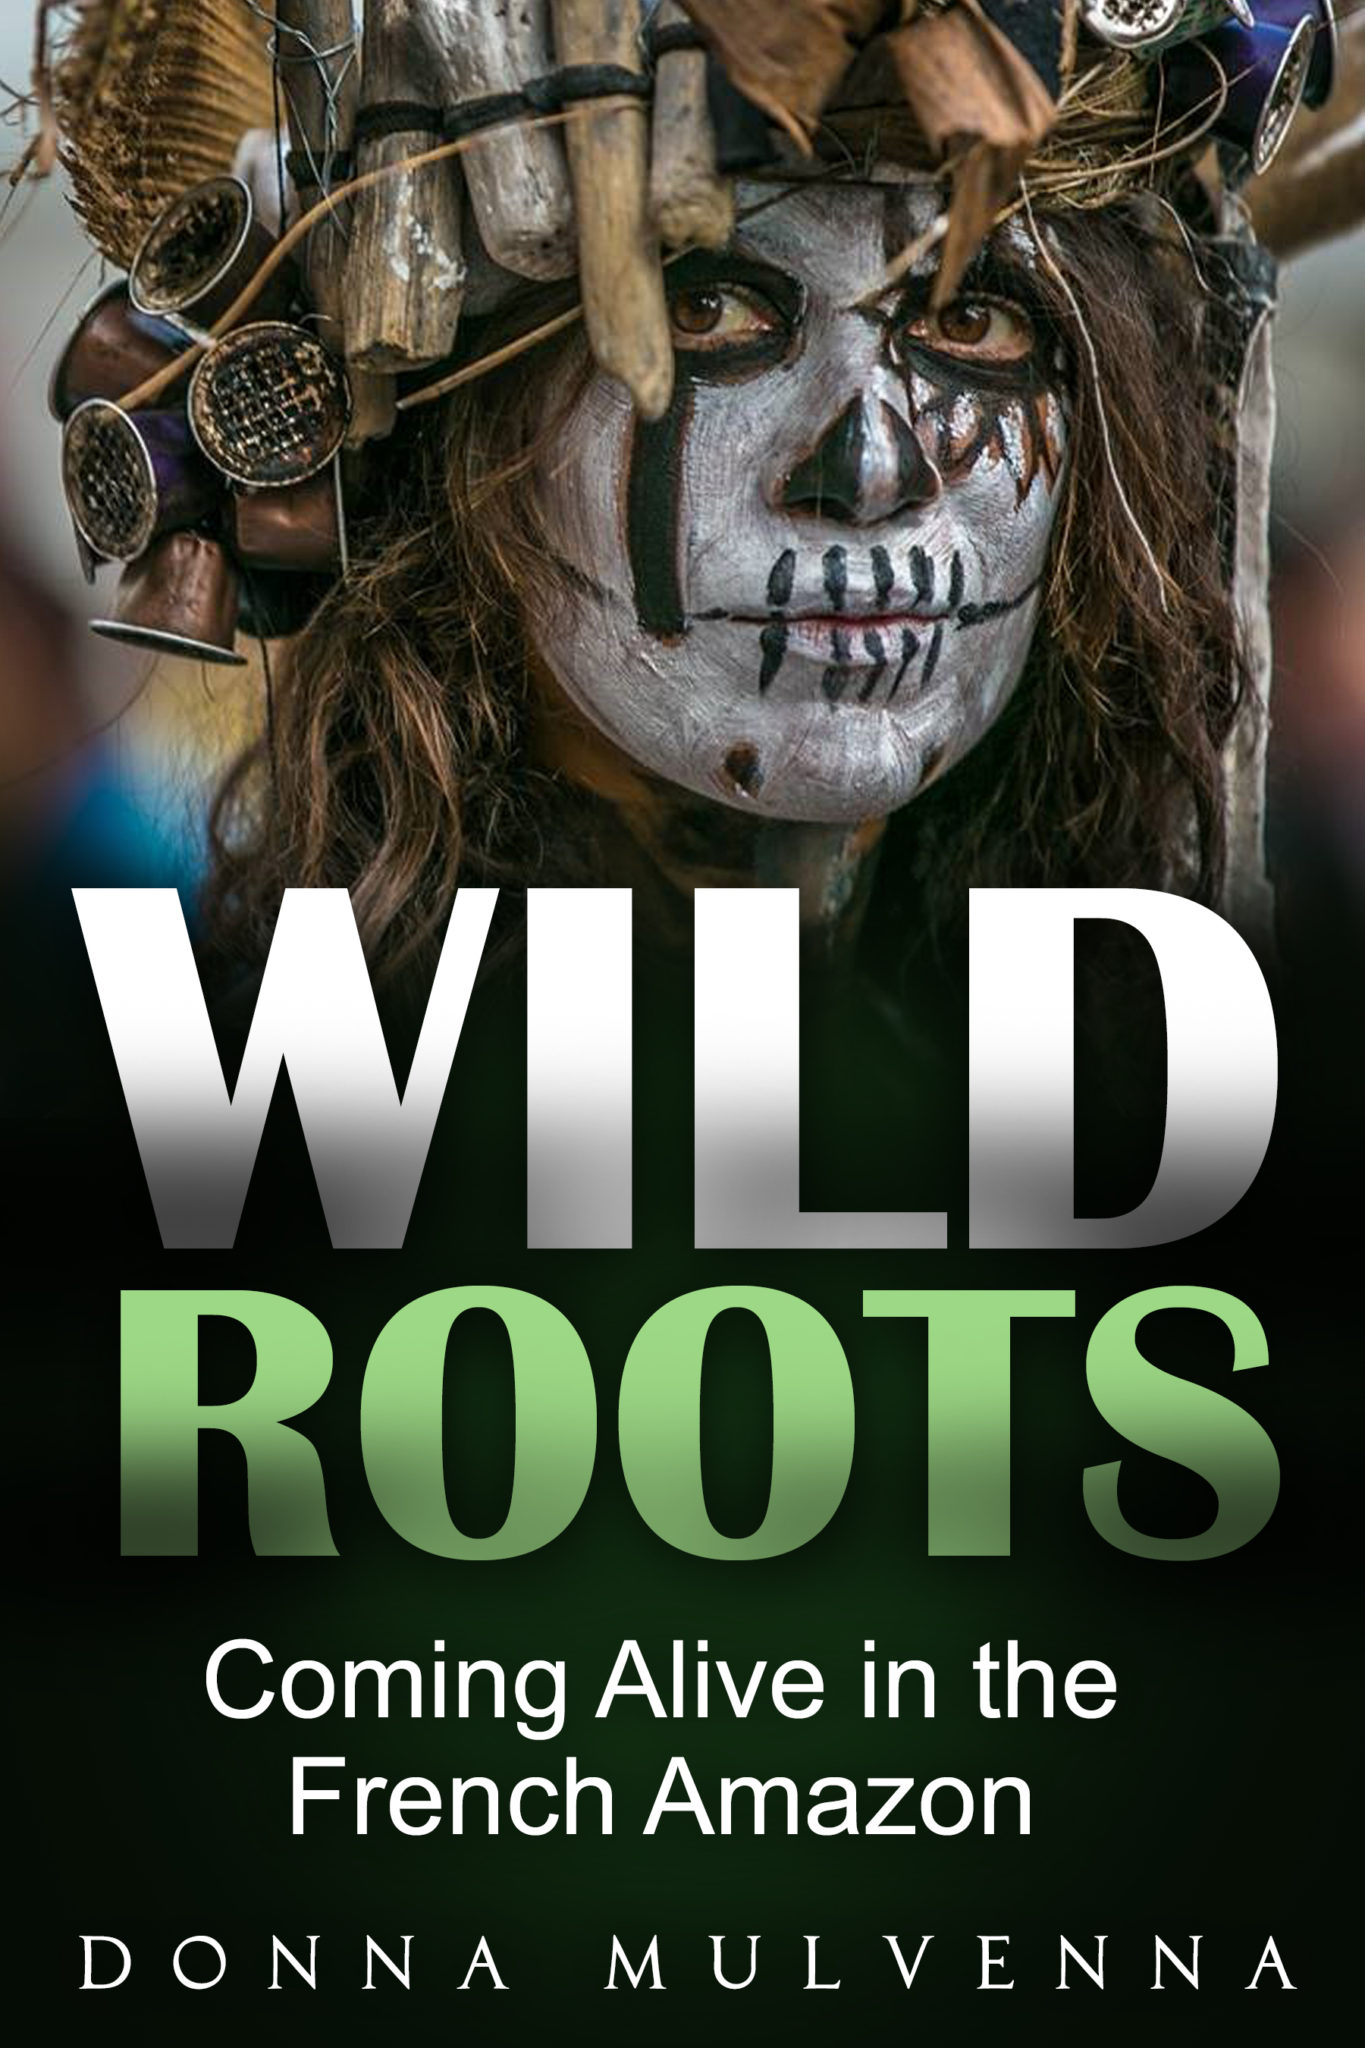 FREE: Wild Roots – Coming Alive in the French Amazon by Donna Mulvenna